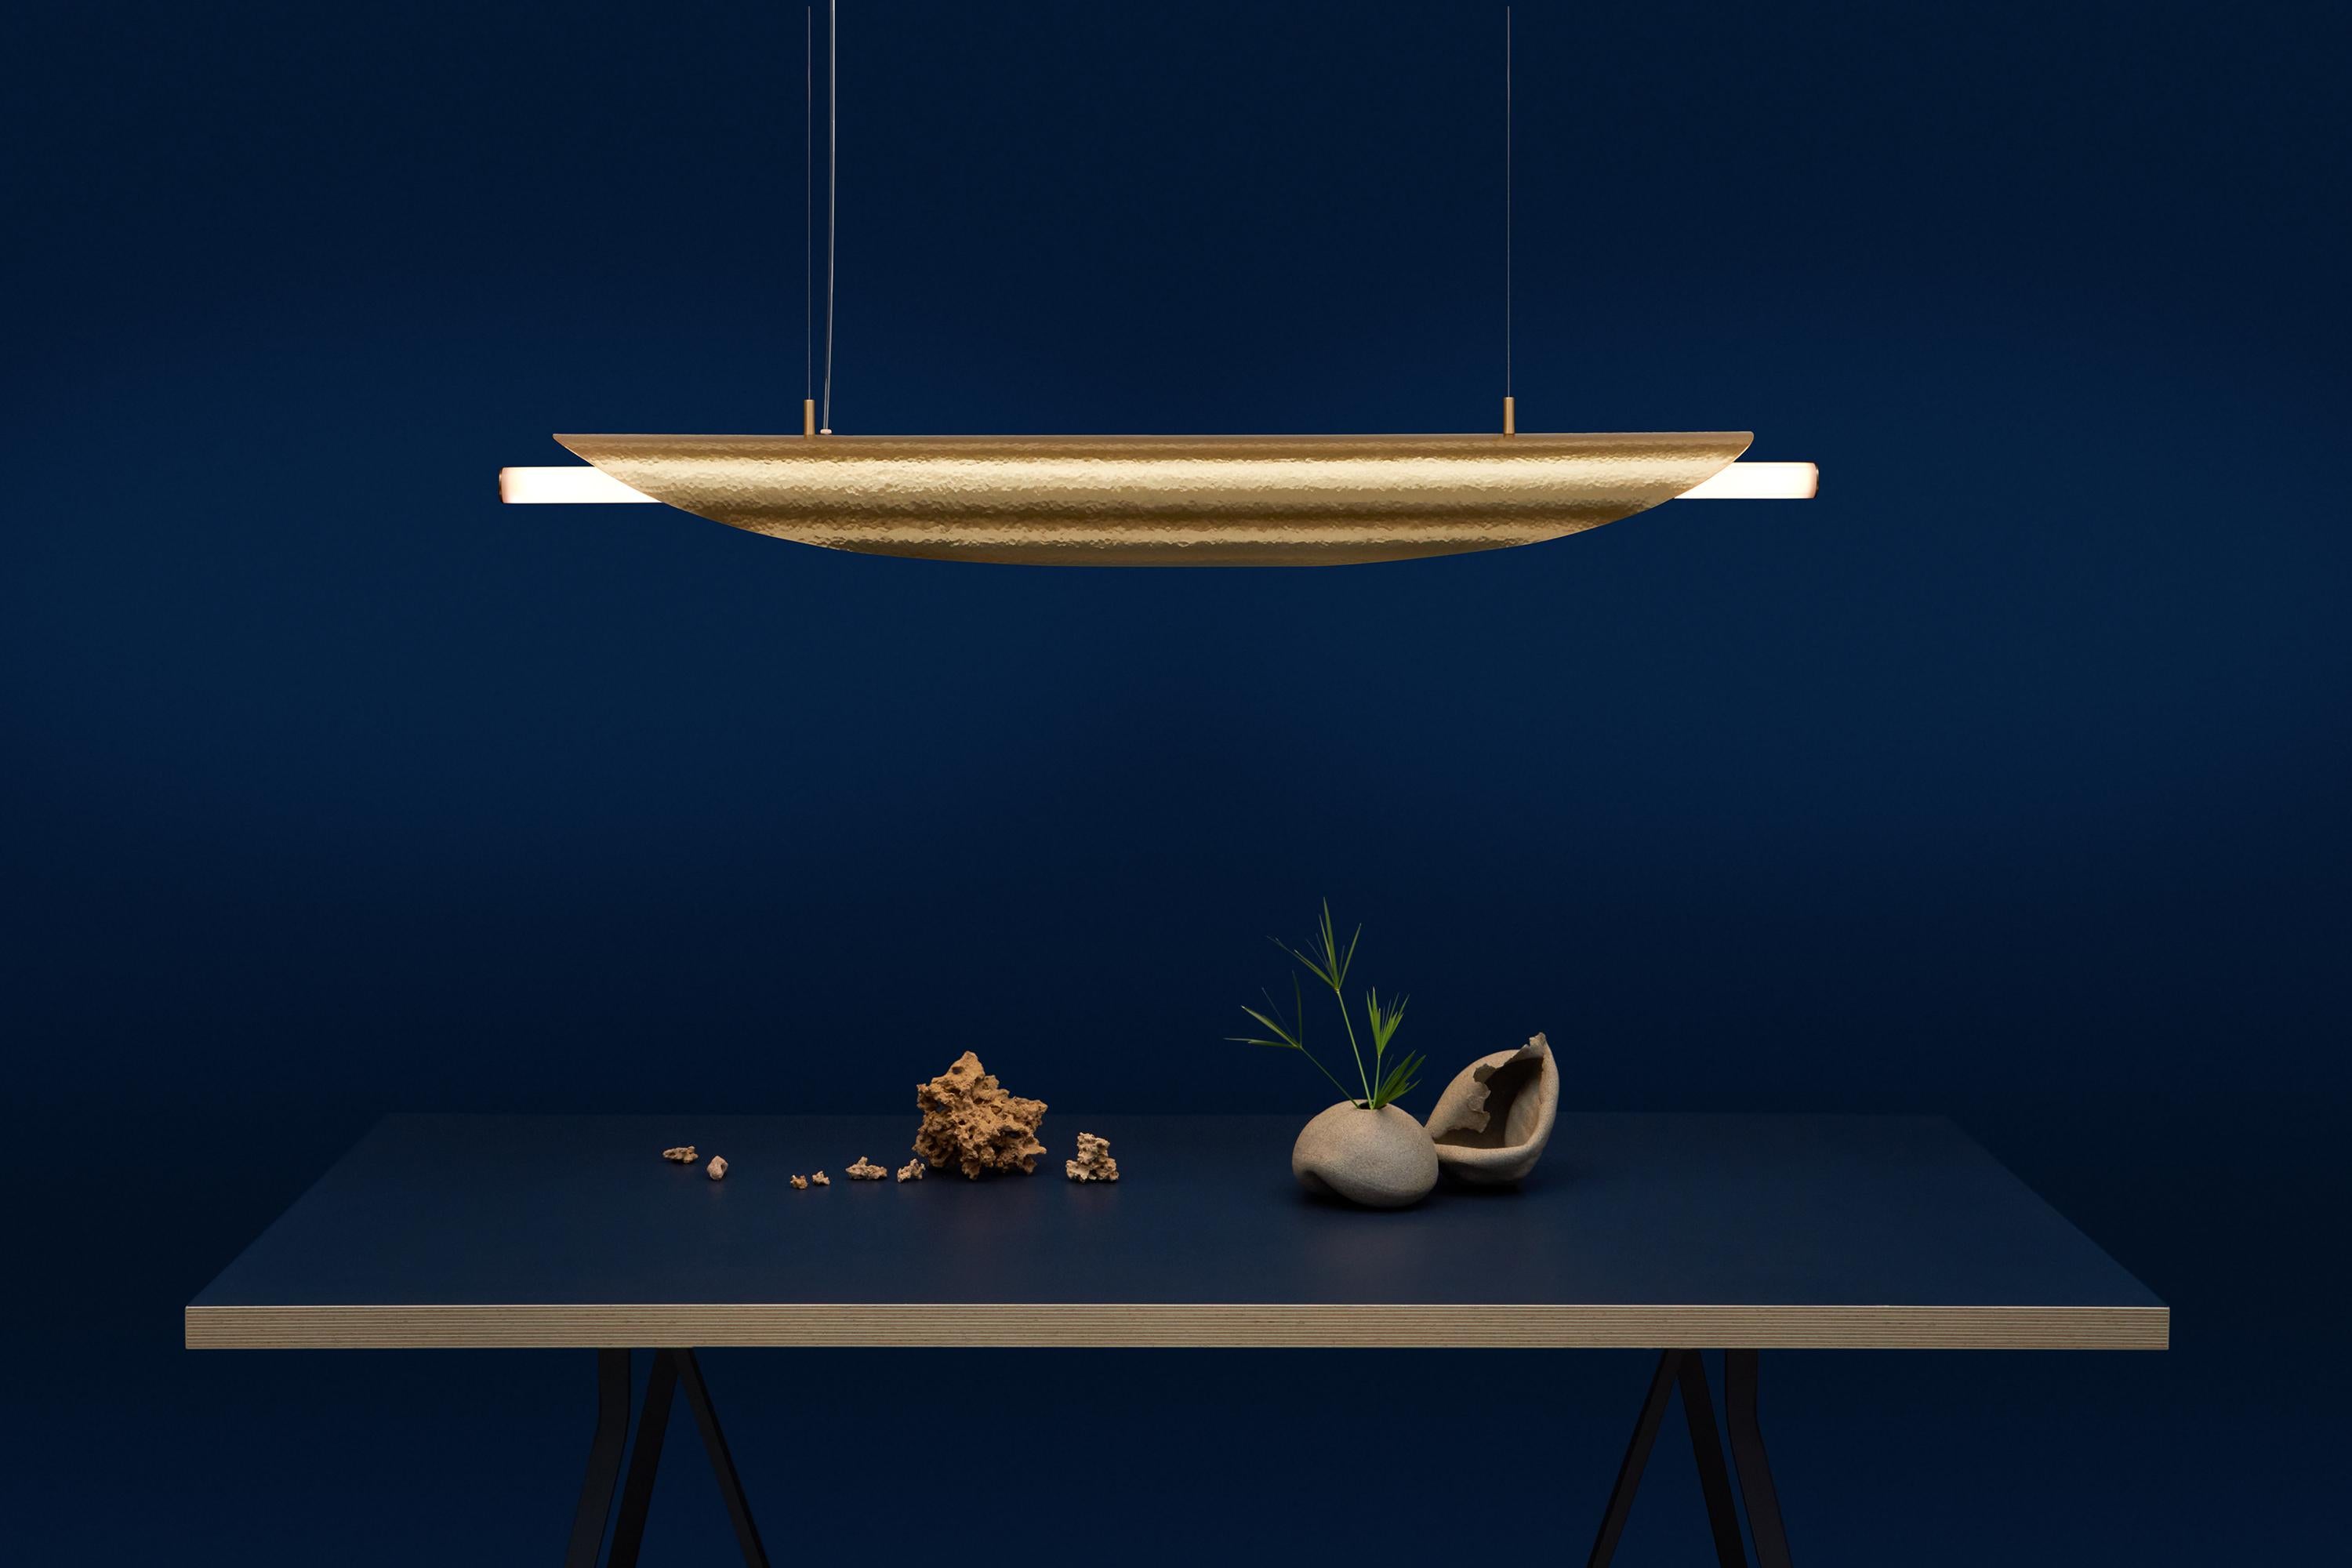 A formidable piece of lighting design that can also grace any space as a streamlined sculptural object when not illuminated, Taco de Luz Grande is a fully custom-designed studio edition by Studio Aristotelis Barakos. A celebration of craftsmanship